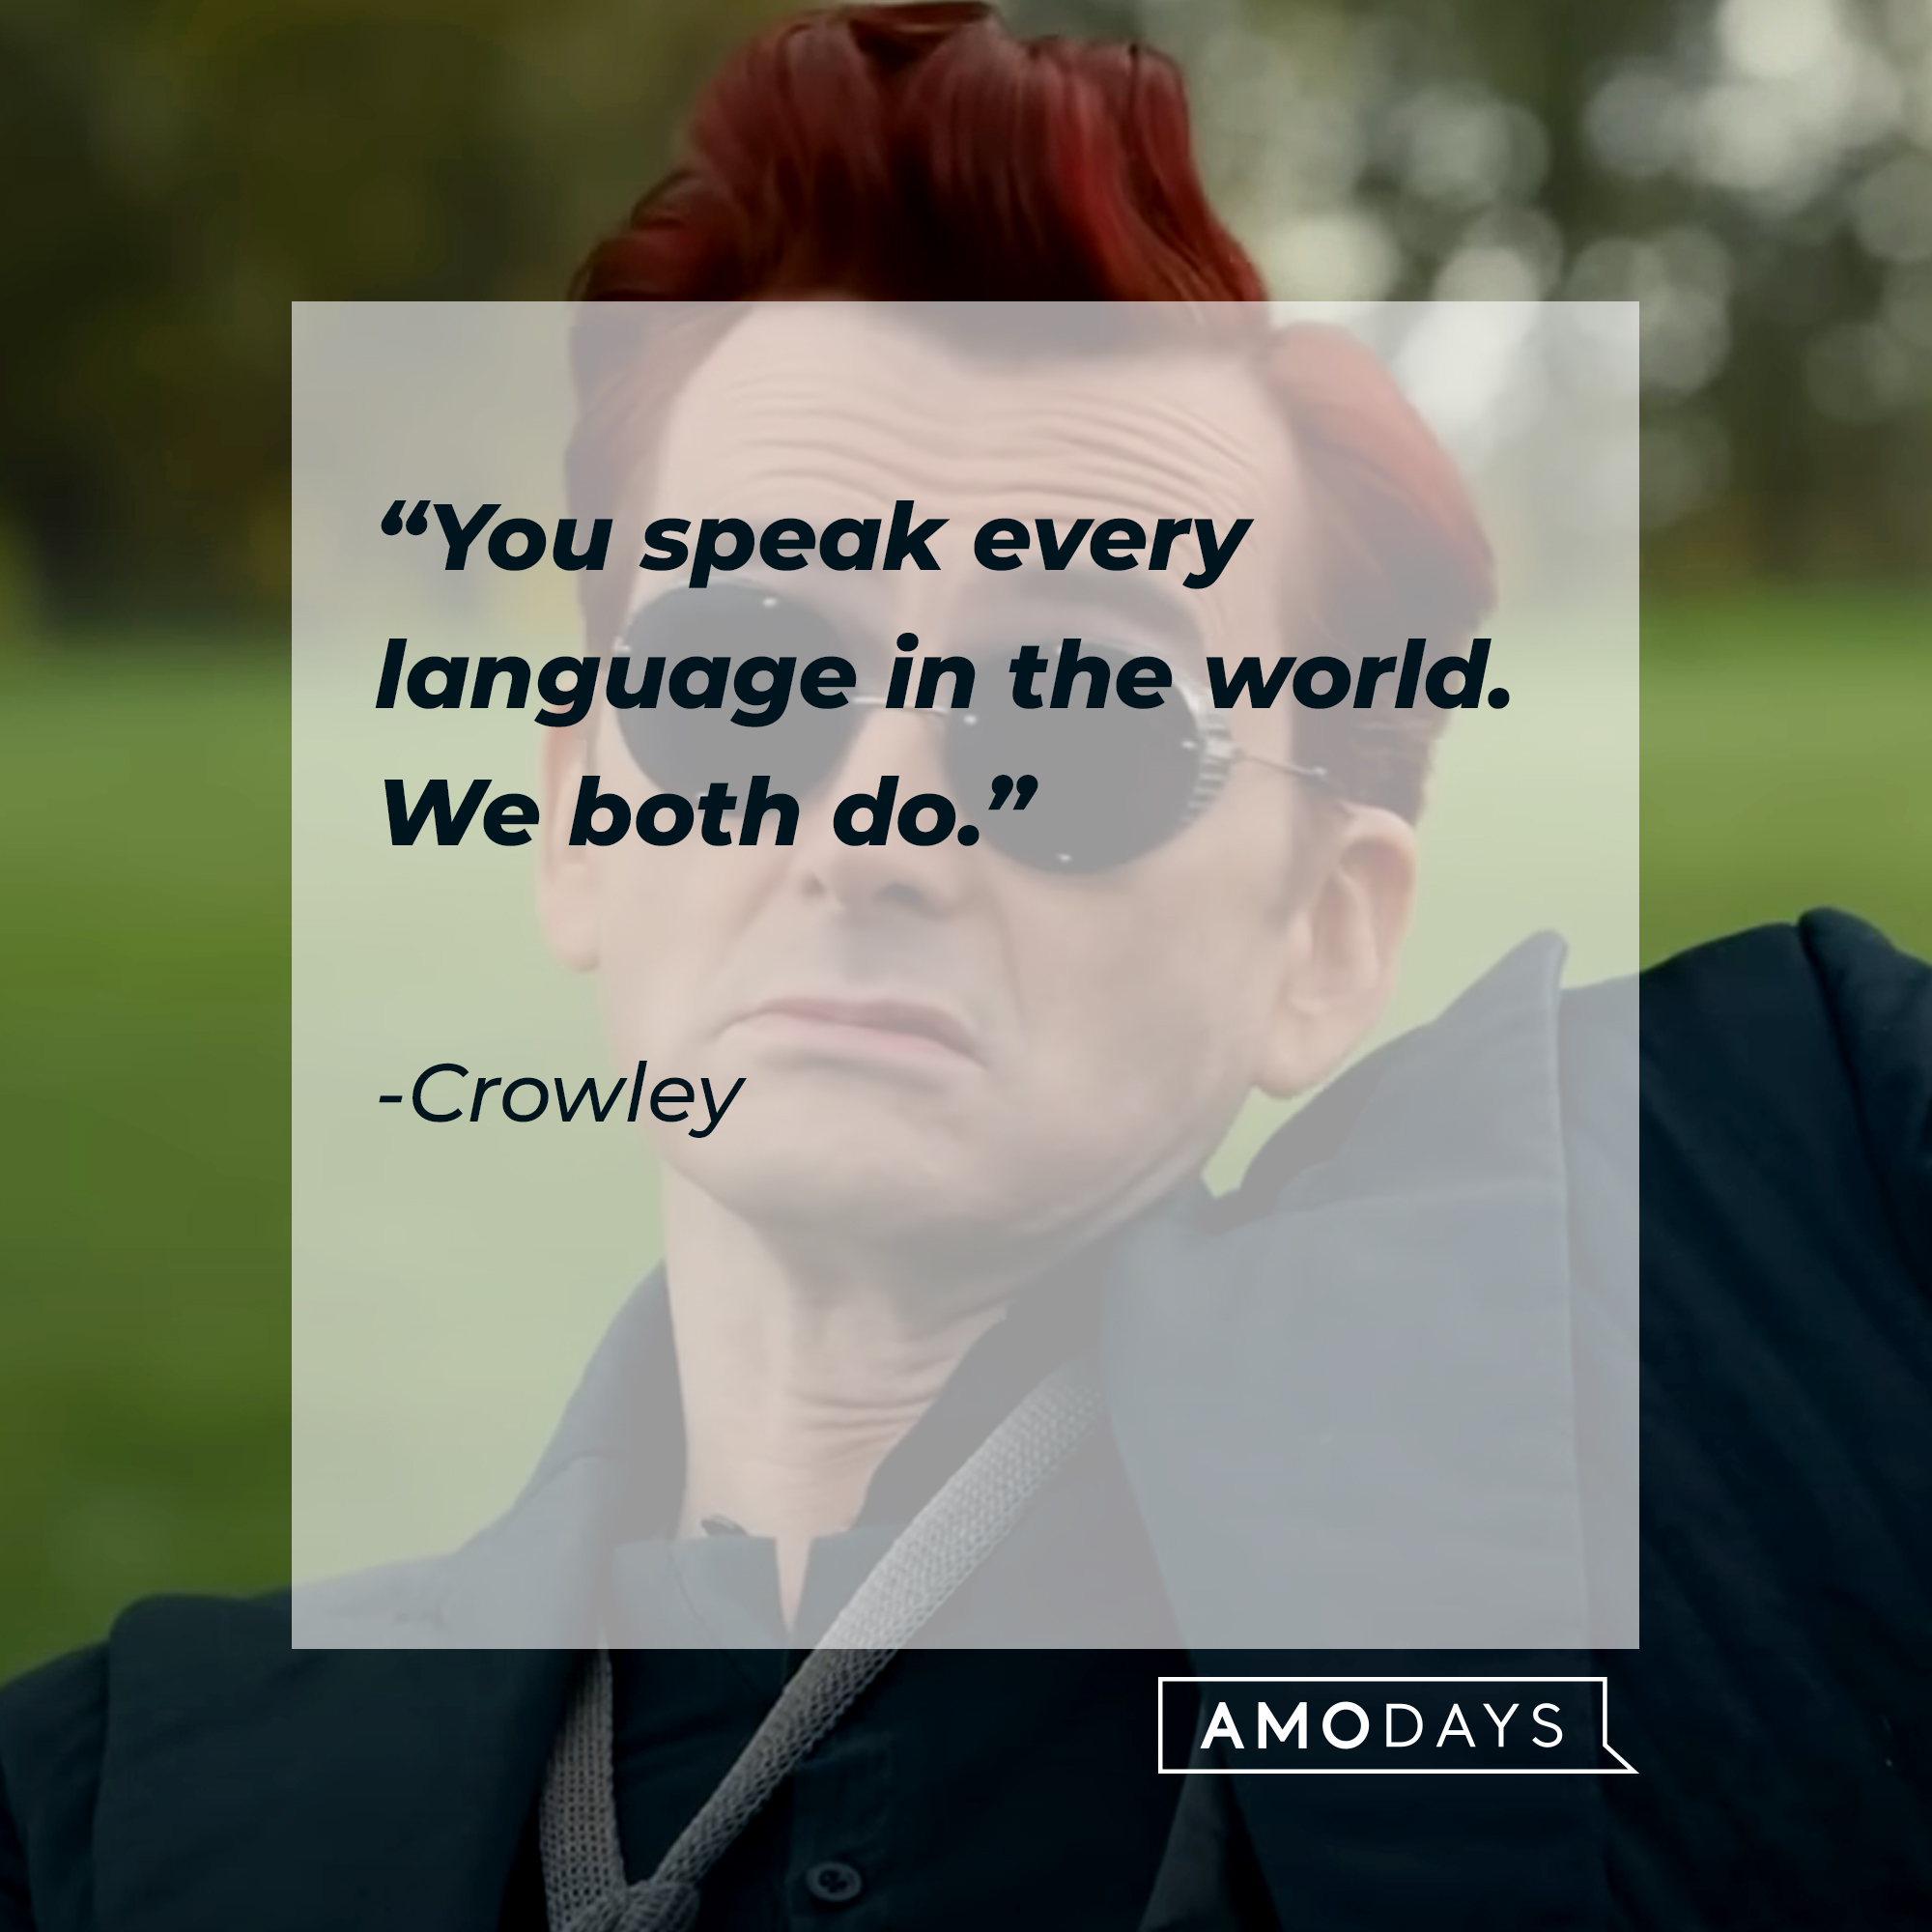 Crowley's quote: "You speak every language in the world. We both do." | Source: Facebook.com/goodomensprime